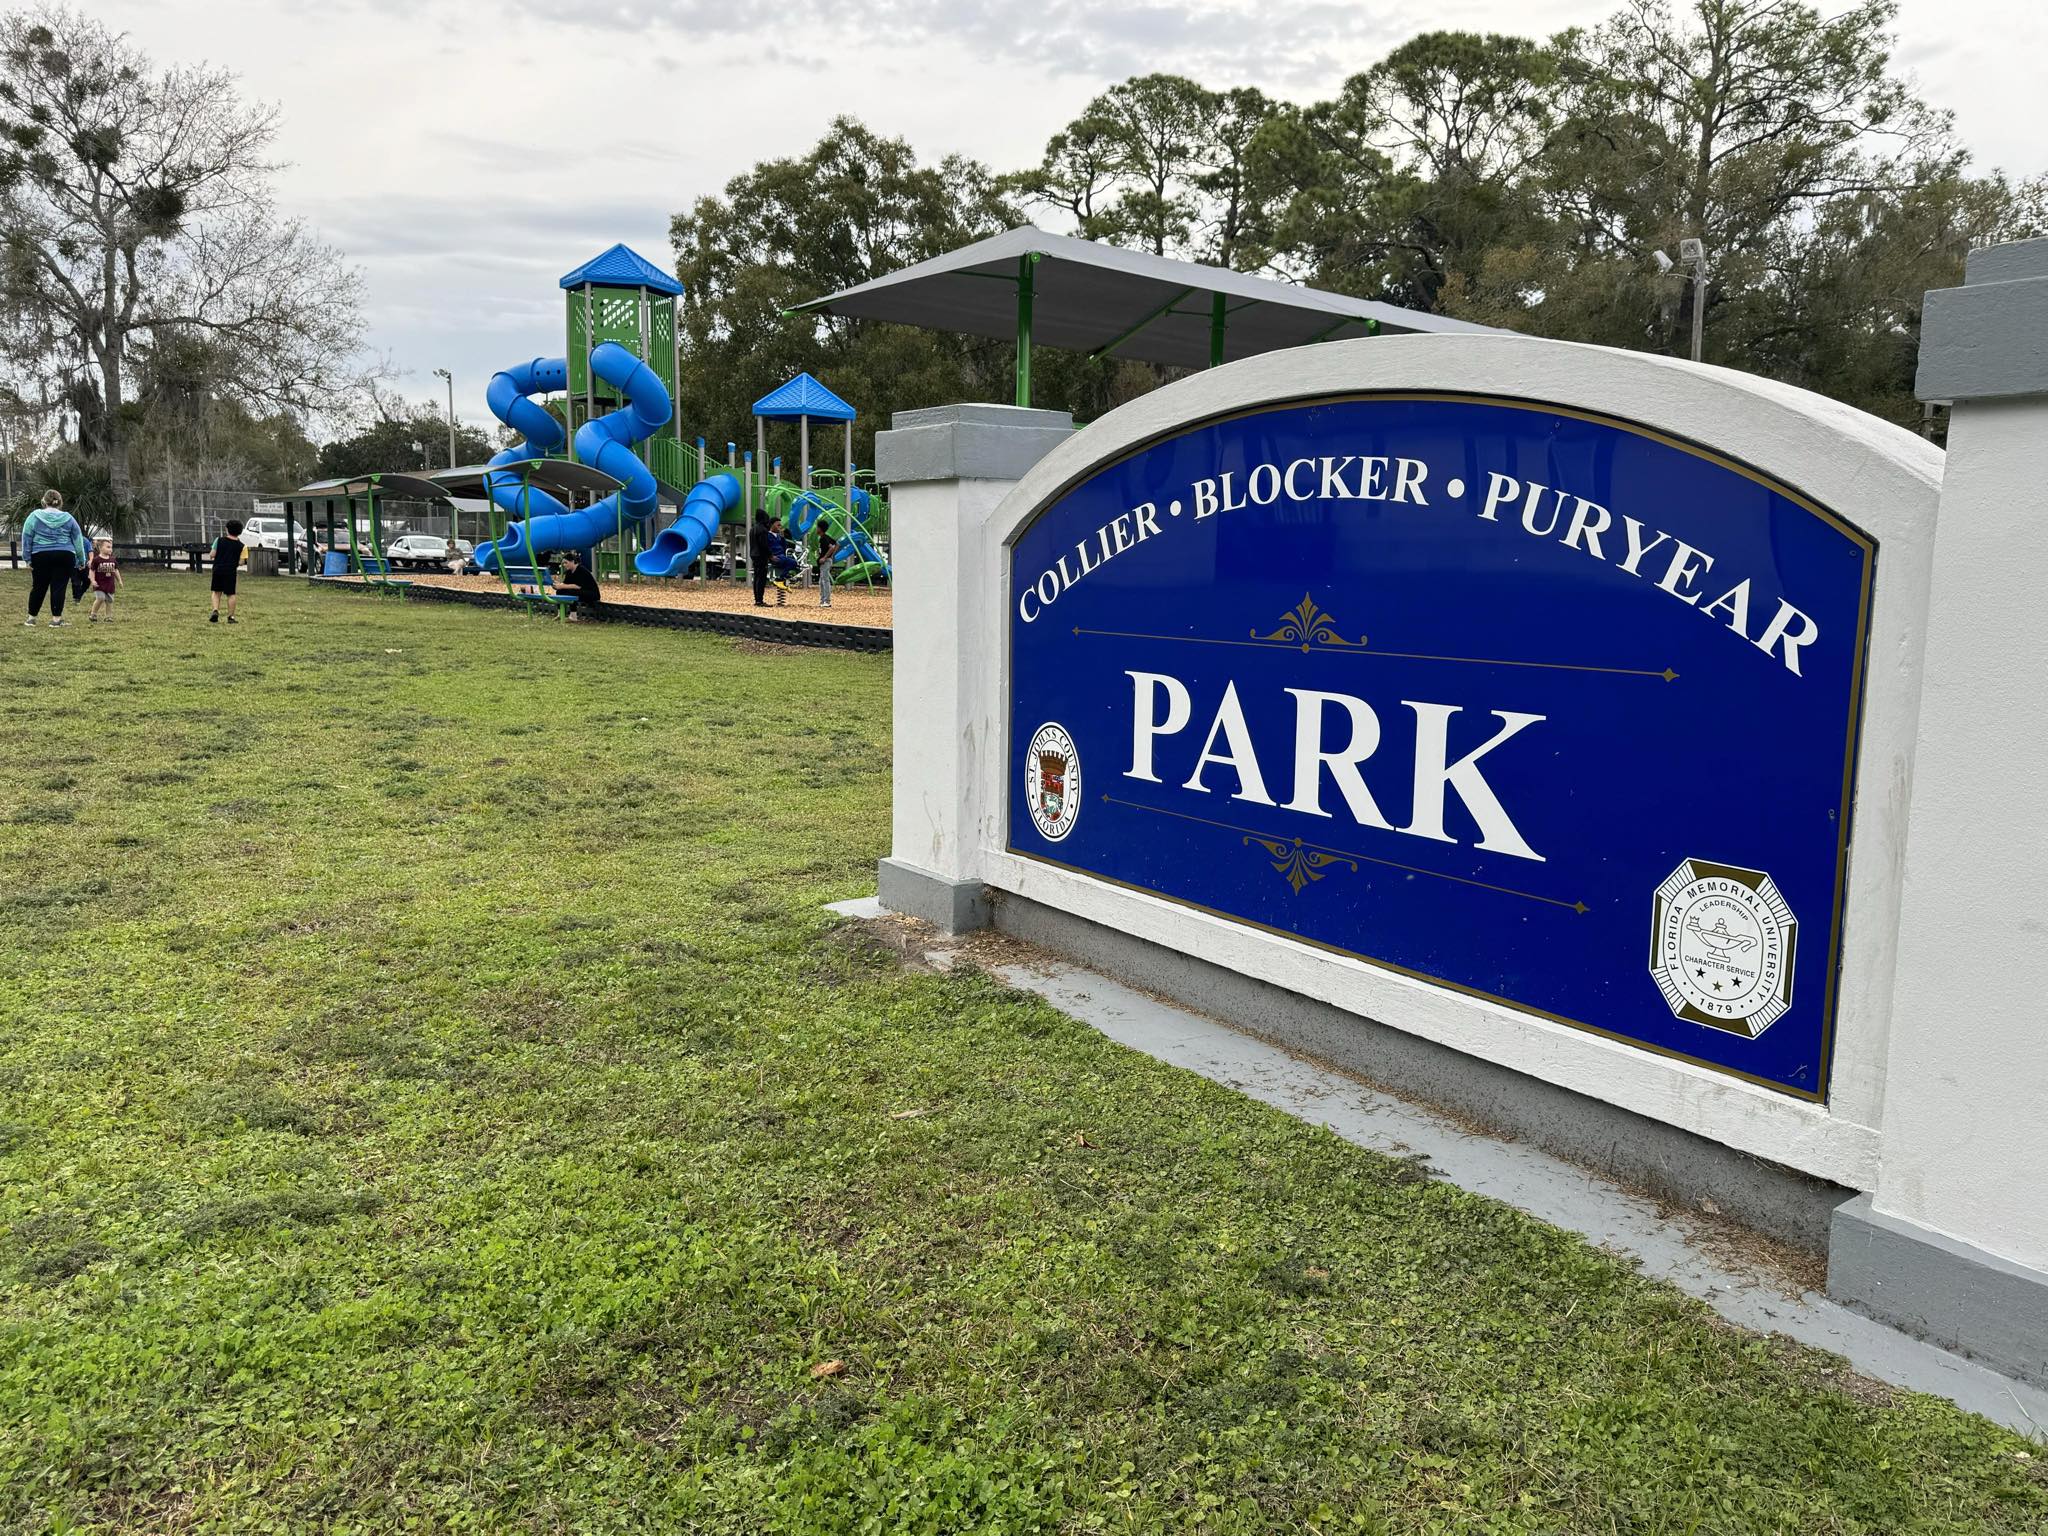 Sign reads "Collier-Blocker-Puryear Park" in front of a playground surrounded by little children.